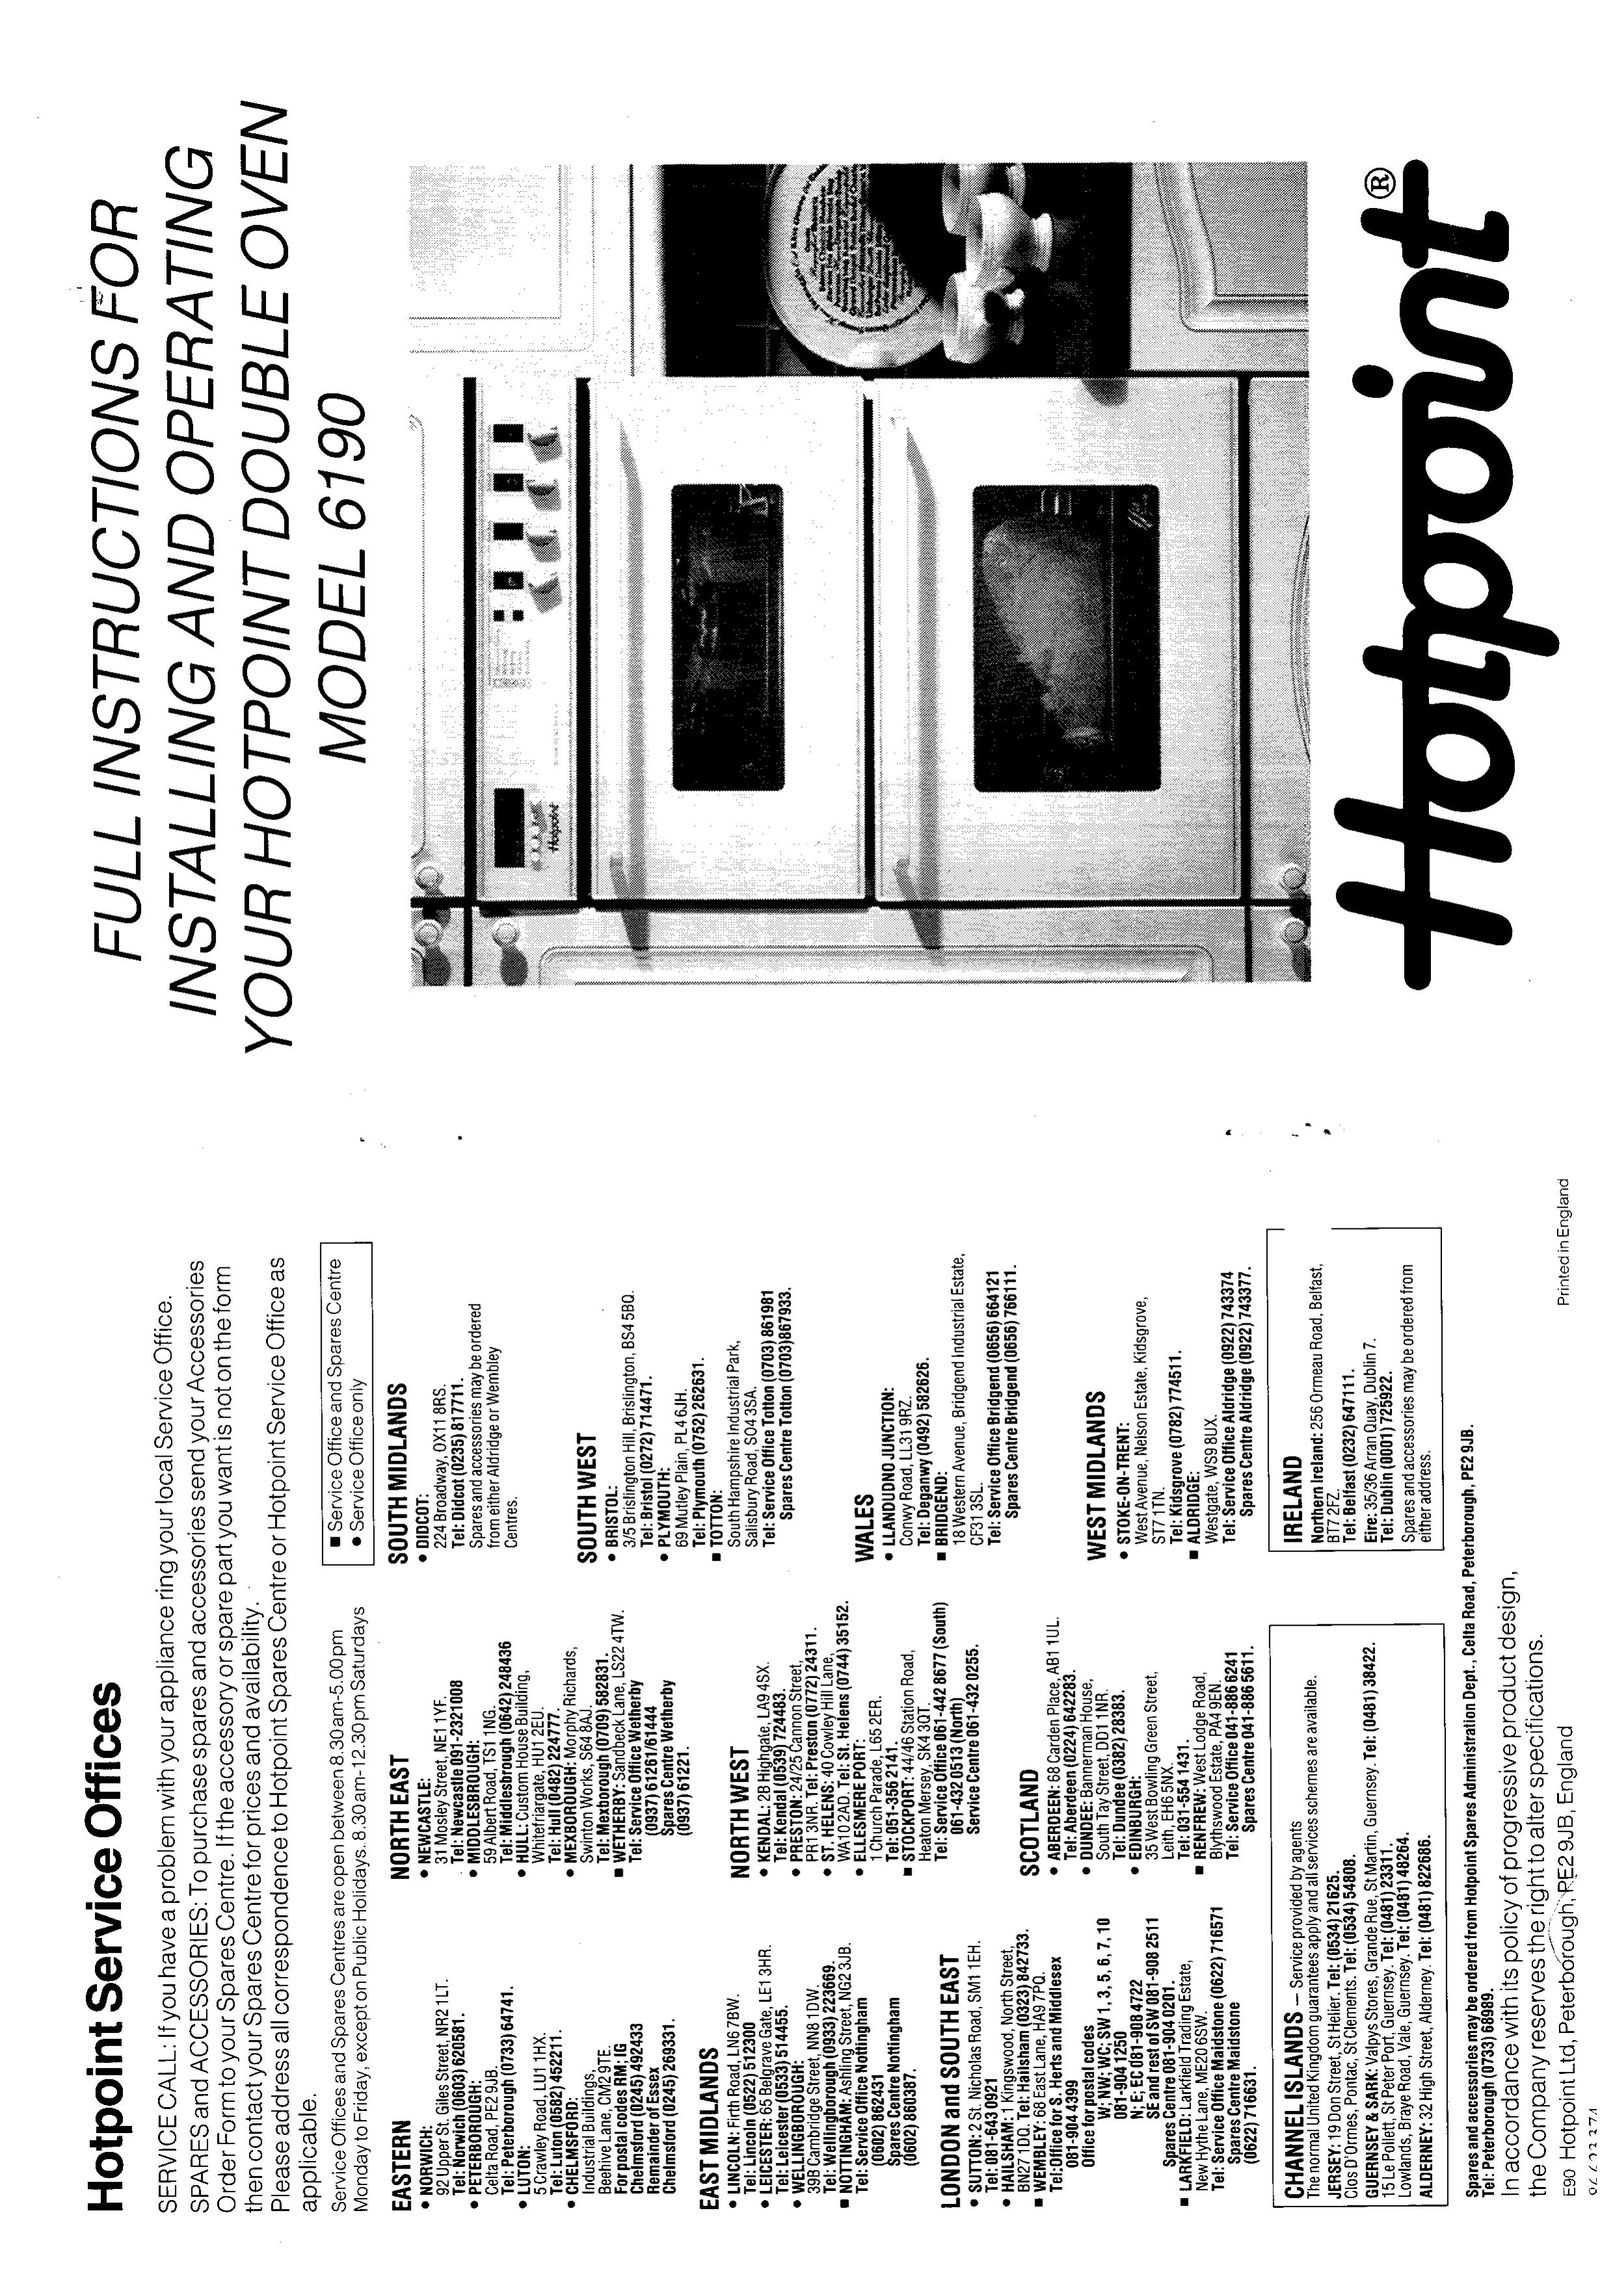 Hotpoint 6190 Double Oven User Manual